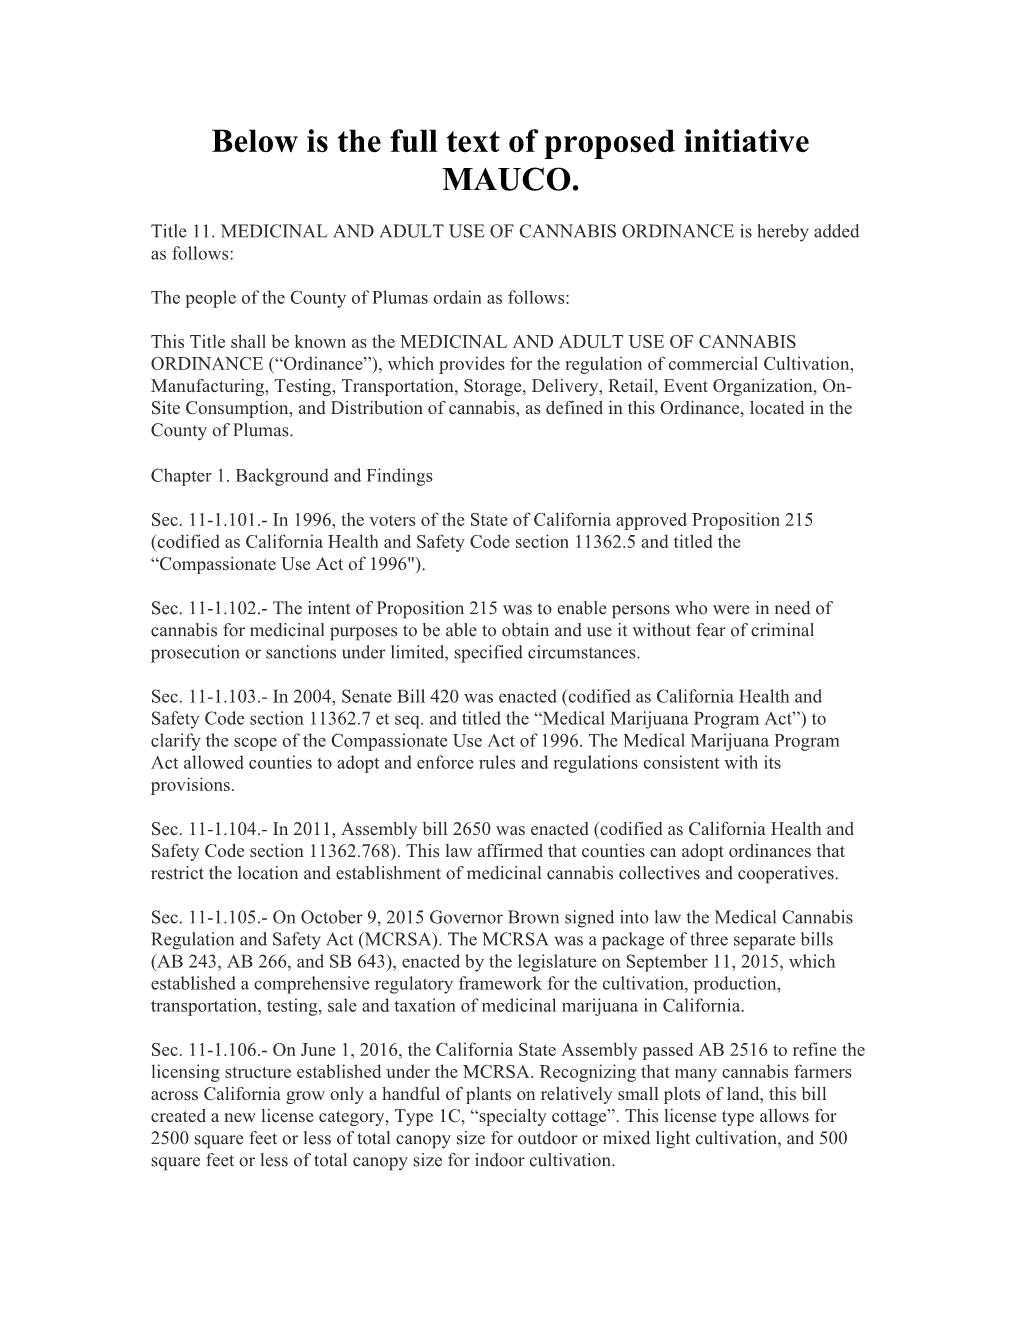 Below Is the Full Text of Proposed Initiative MAUCO